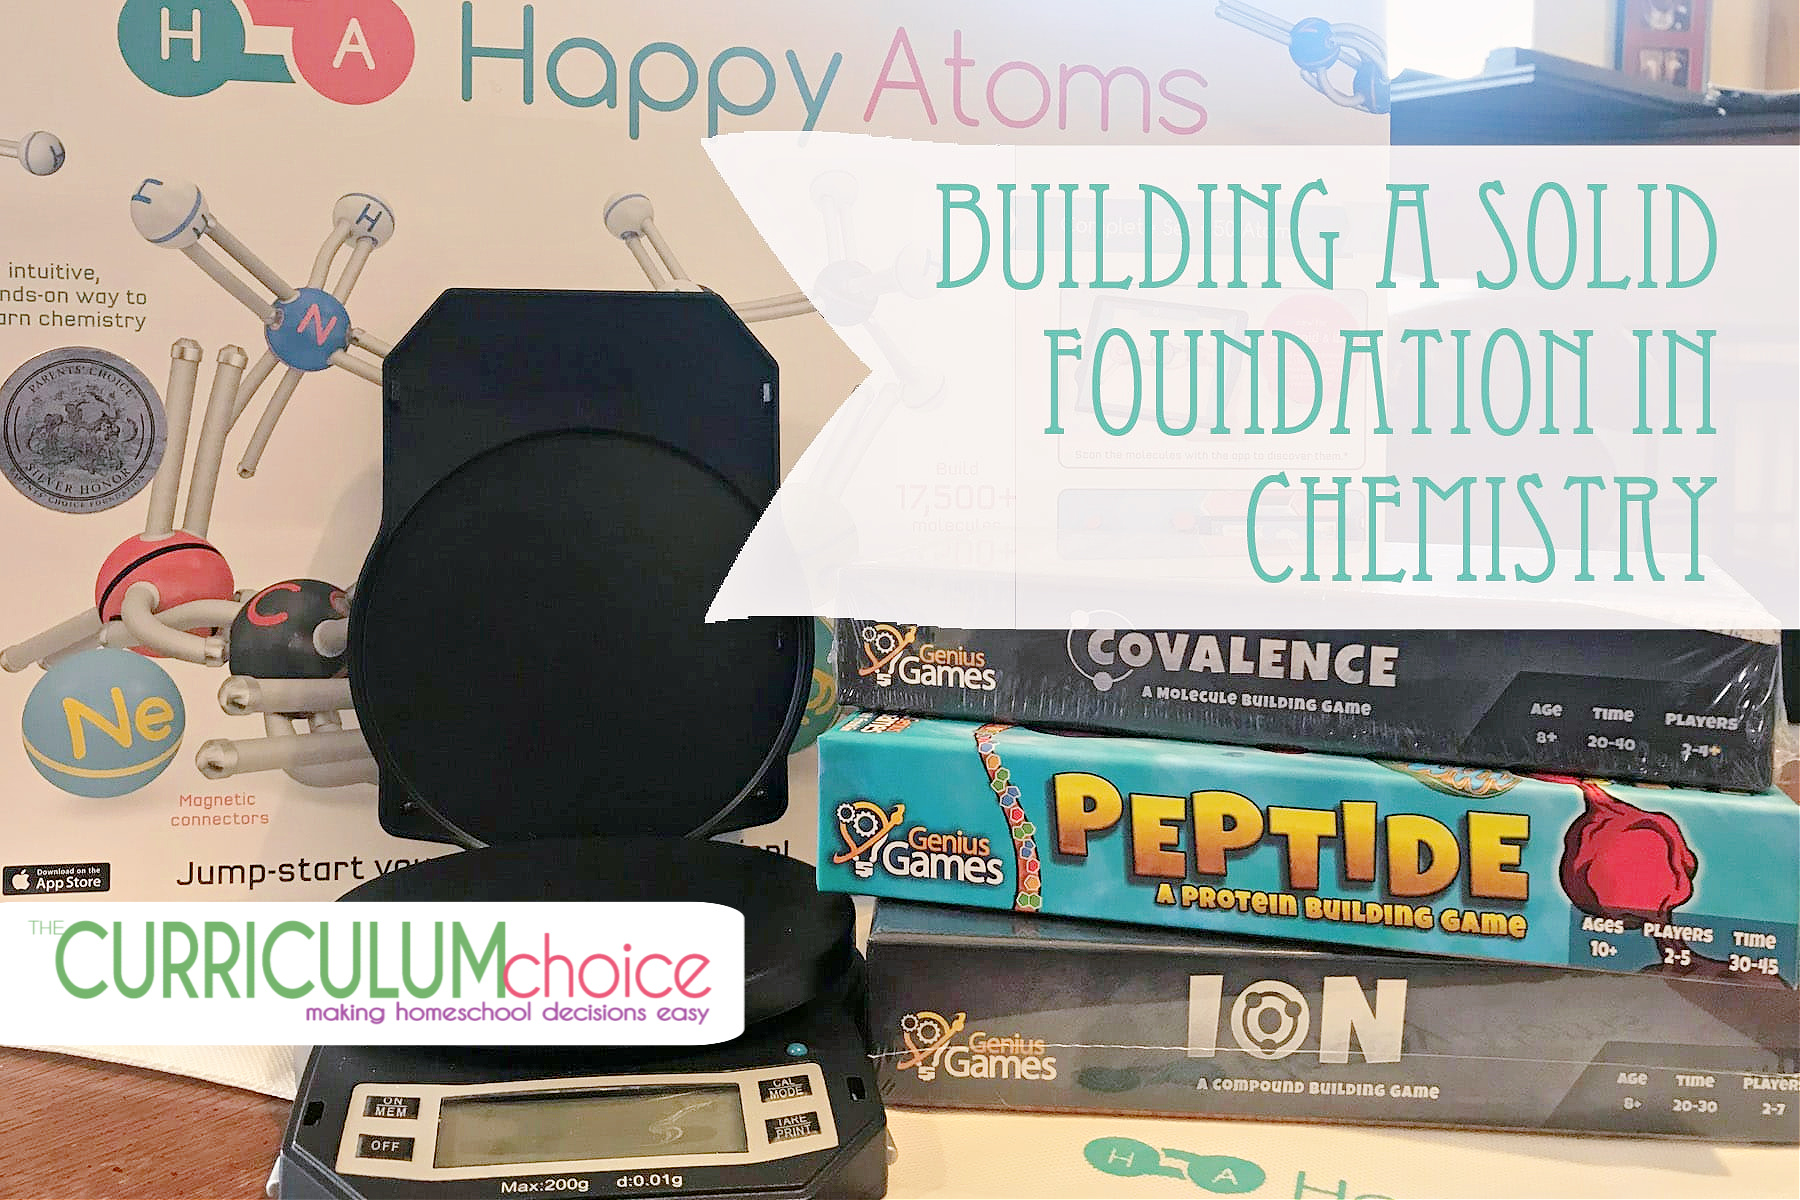 Building a Solid Foundation in Chemistry with Home Science Tools